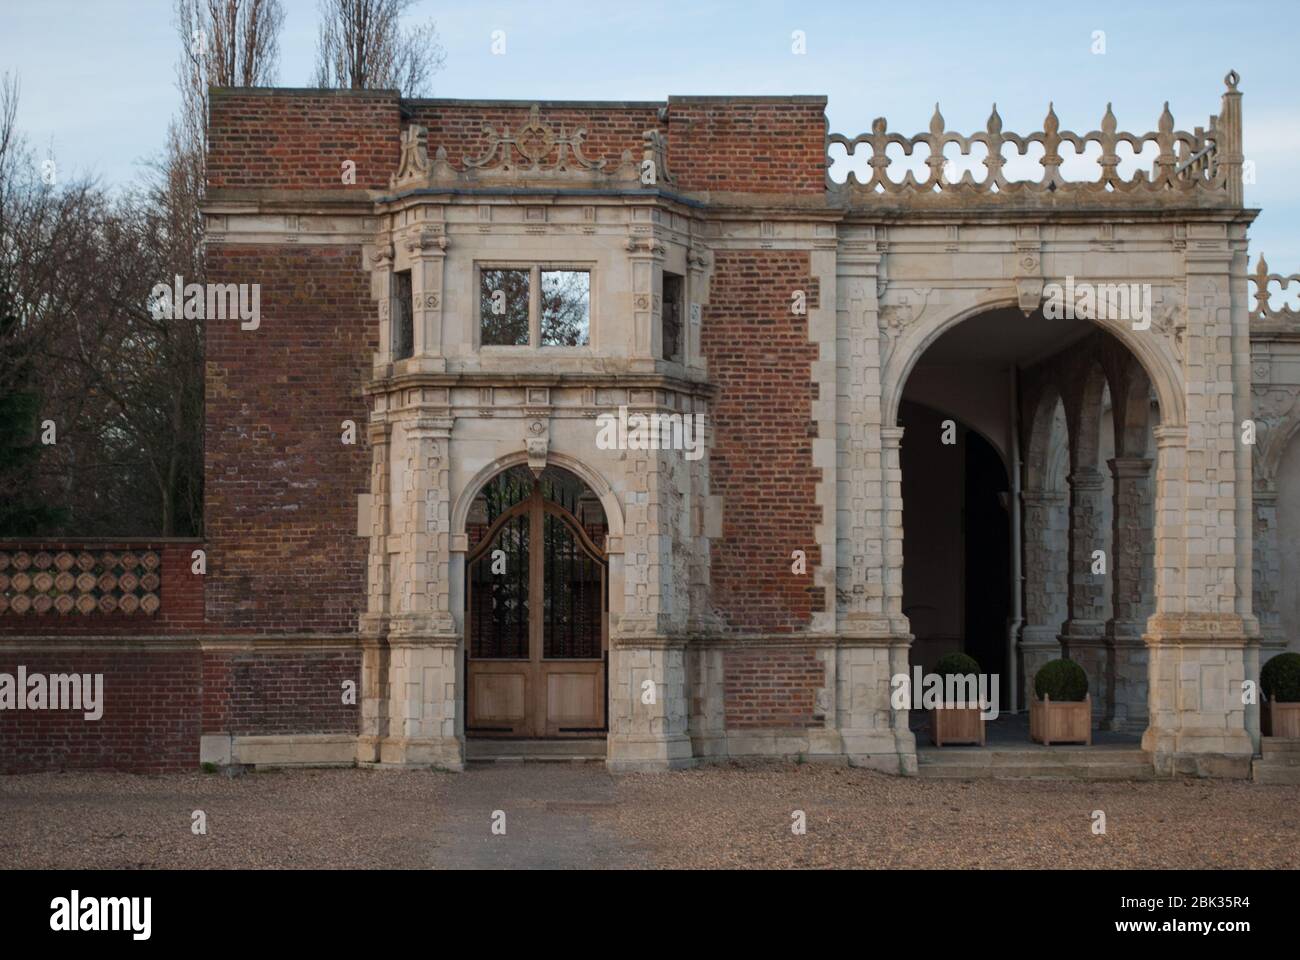 Jacobean Architecture Ruins Old Country House Holland Park Red Brick Stone Palace Holland House, Kensington, London W8 7QU by John Thorpe Stock Photo